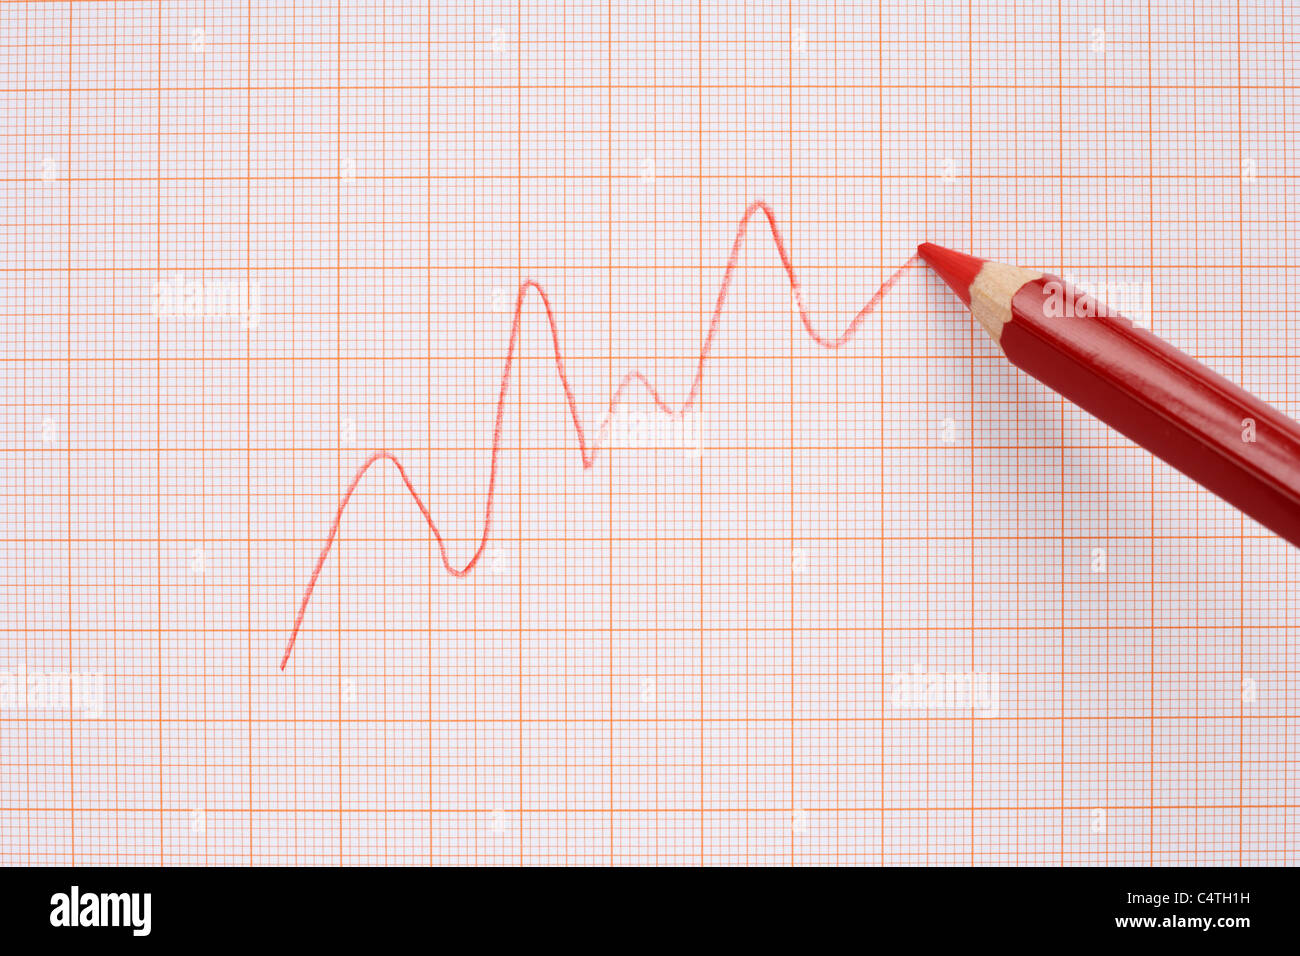 Drawing Line Graph on Graph Paper Stock Photo